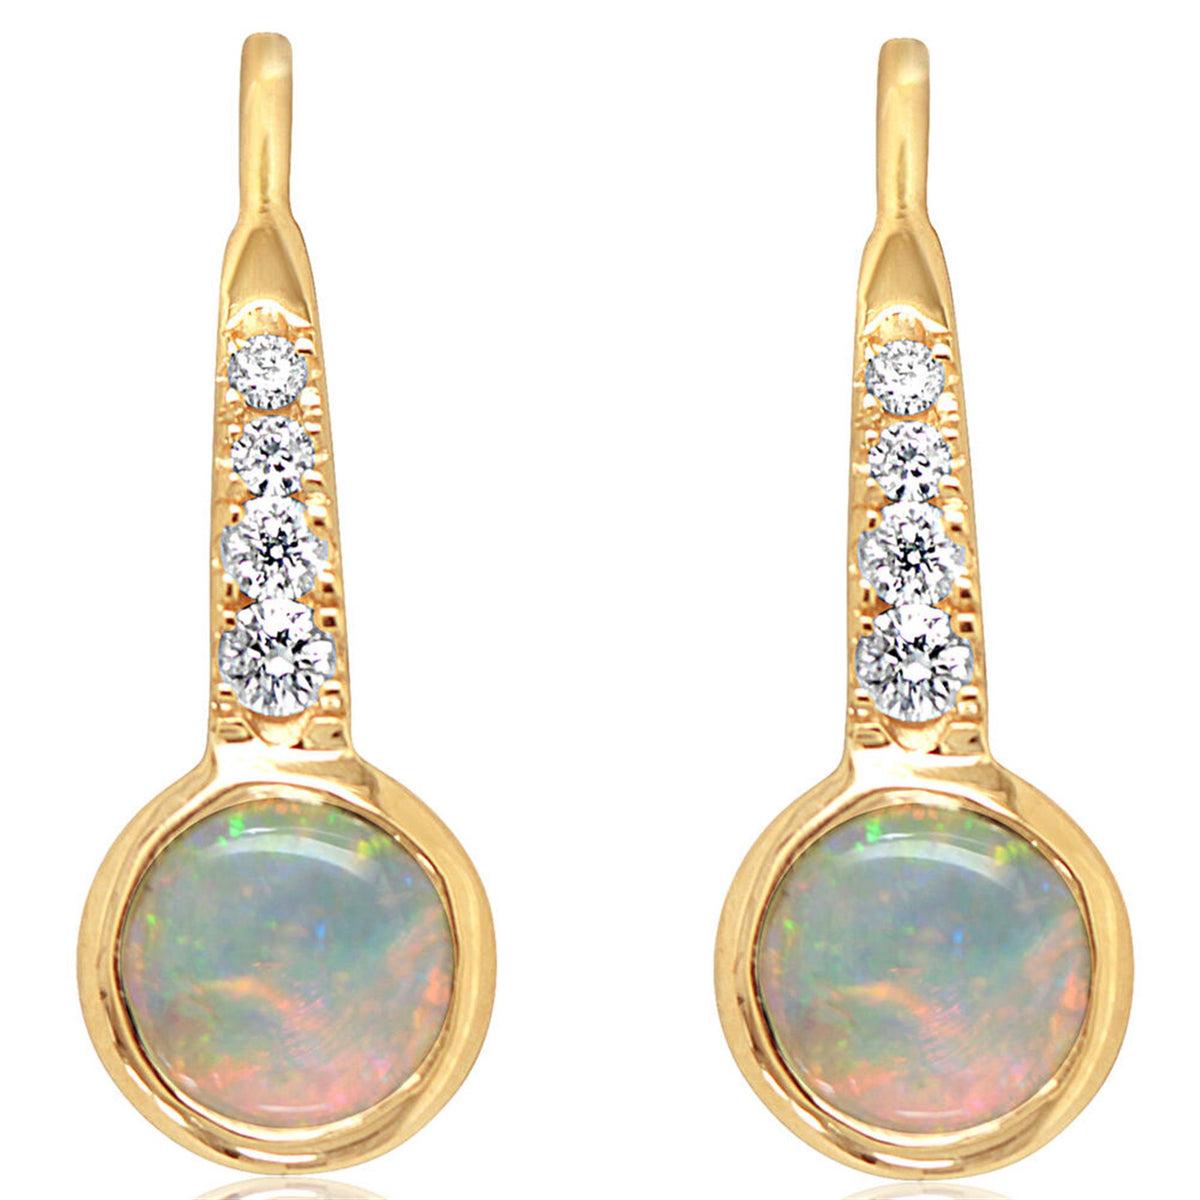 14Kt Yellow Gold Leverback Earrings With 0.62ct Australian Opals